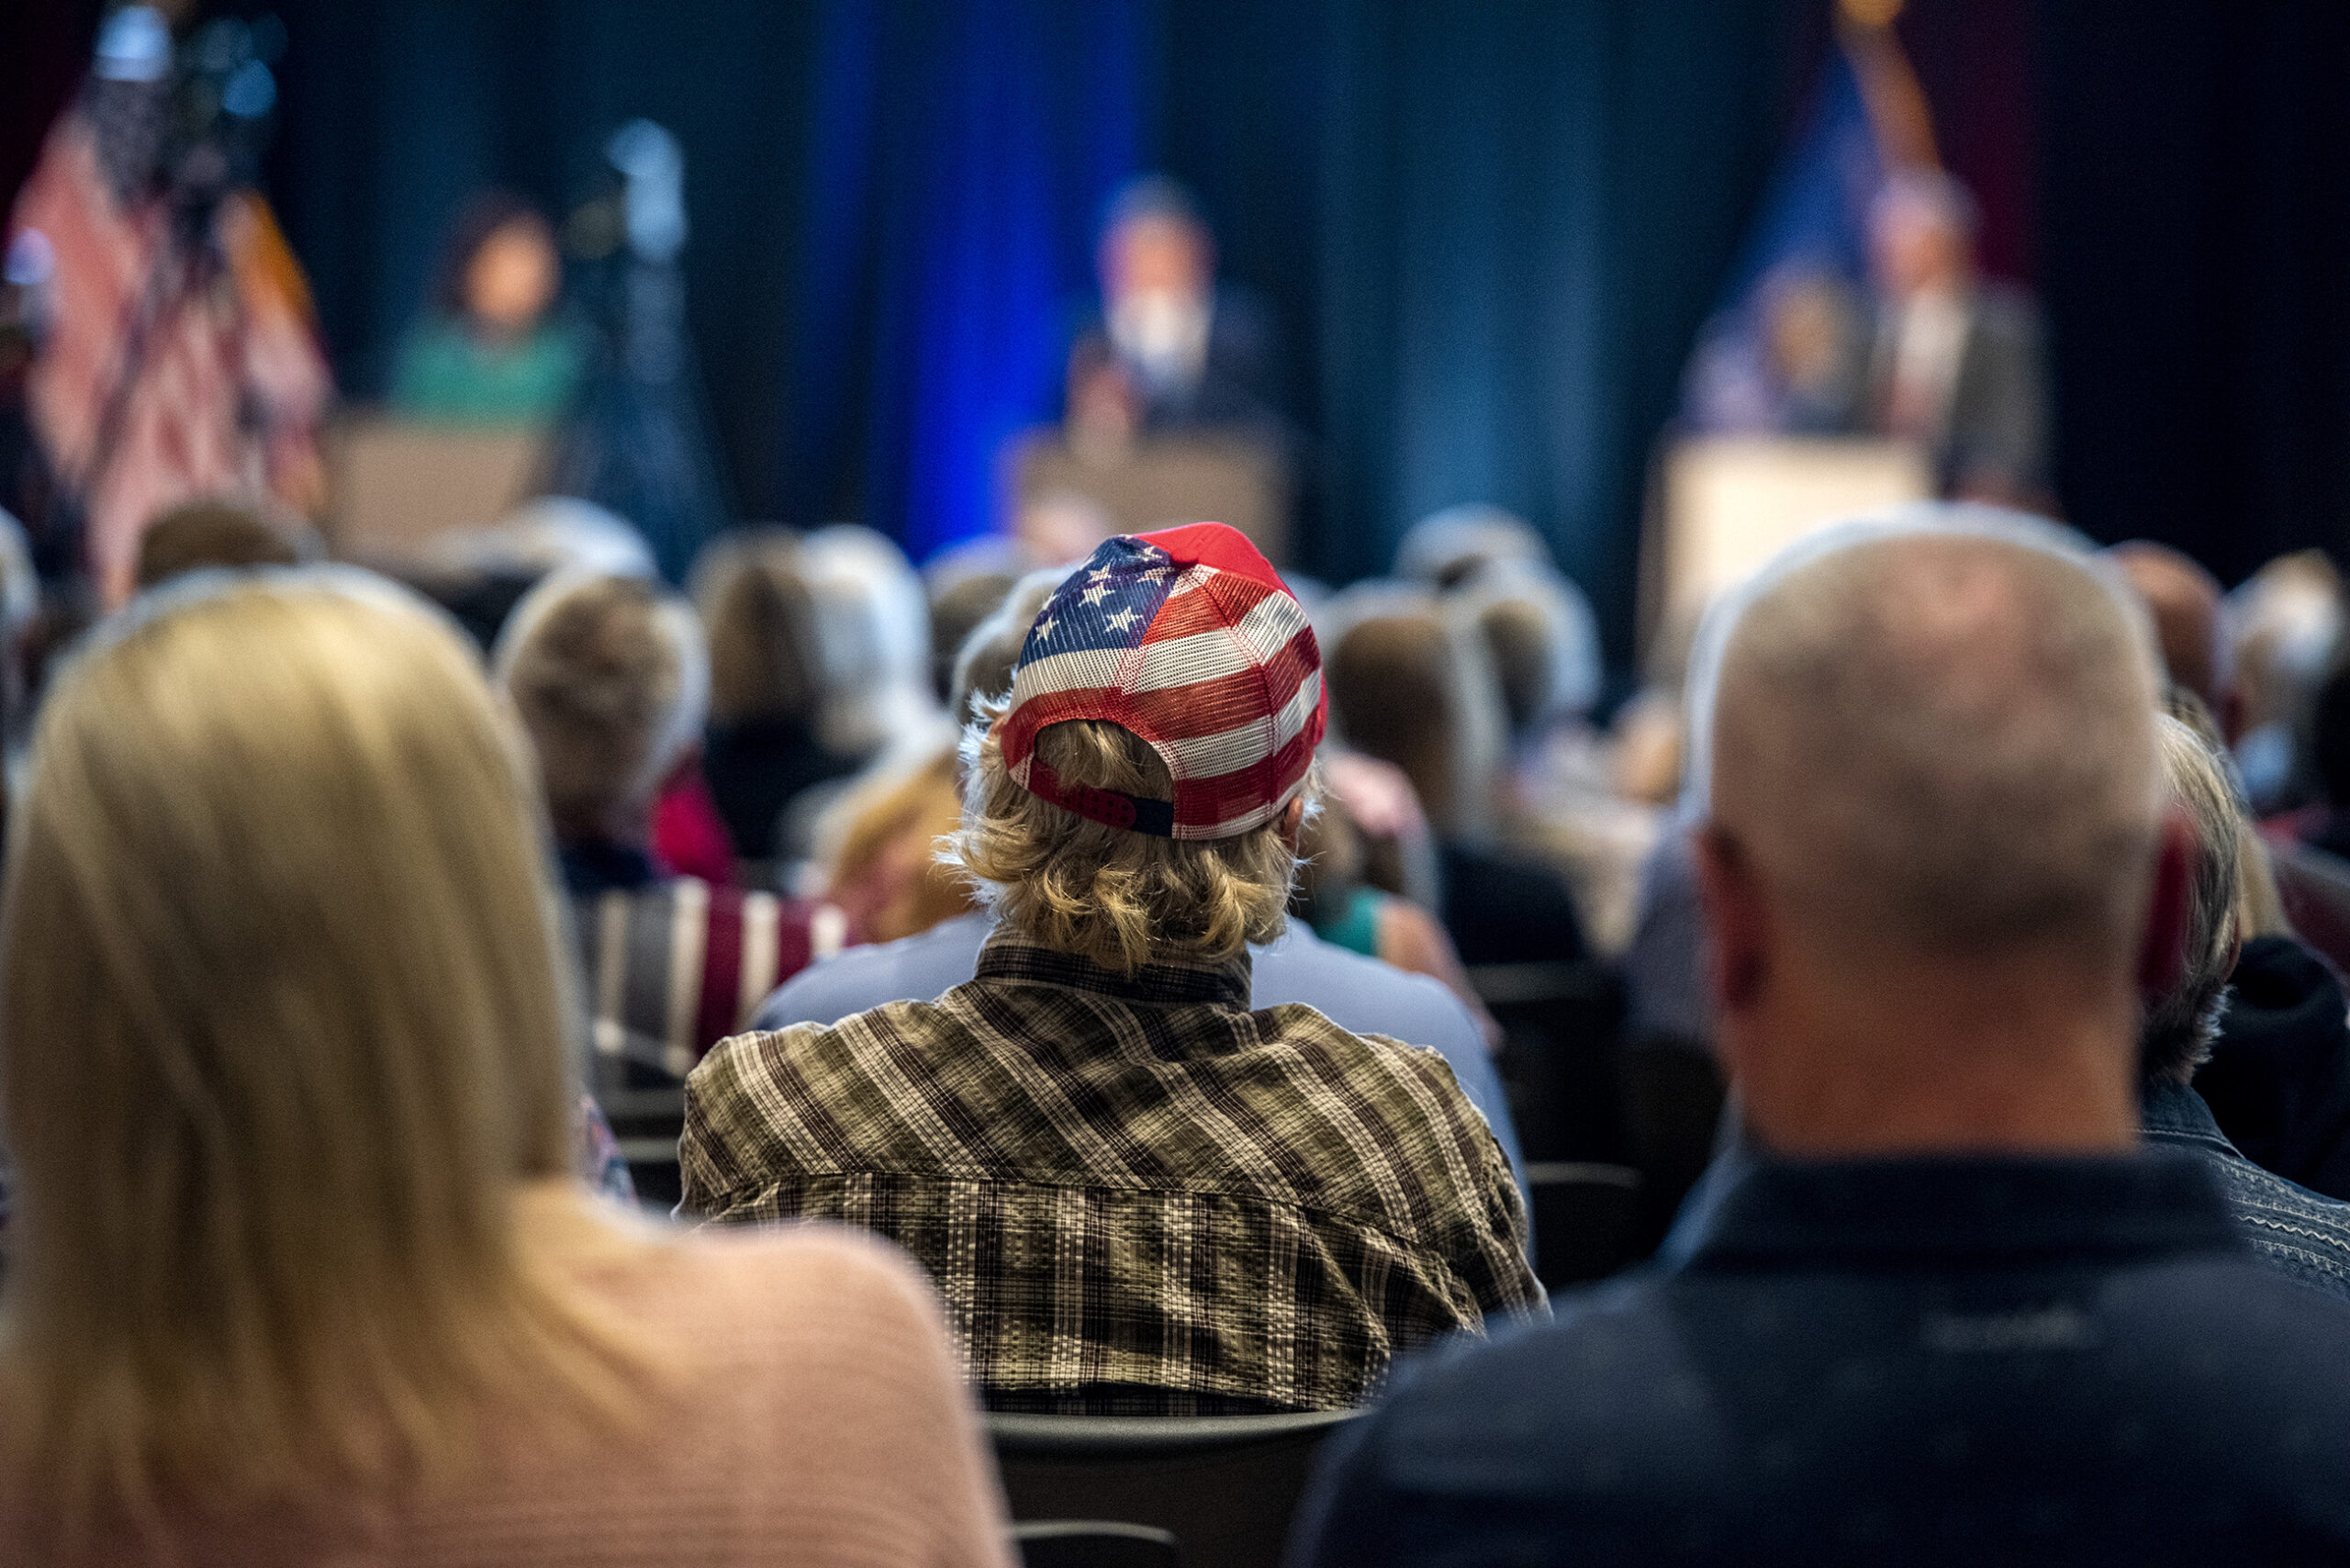 An attendee in a U.S. flag pattern hat sits in the crowd.